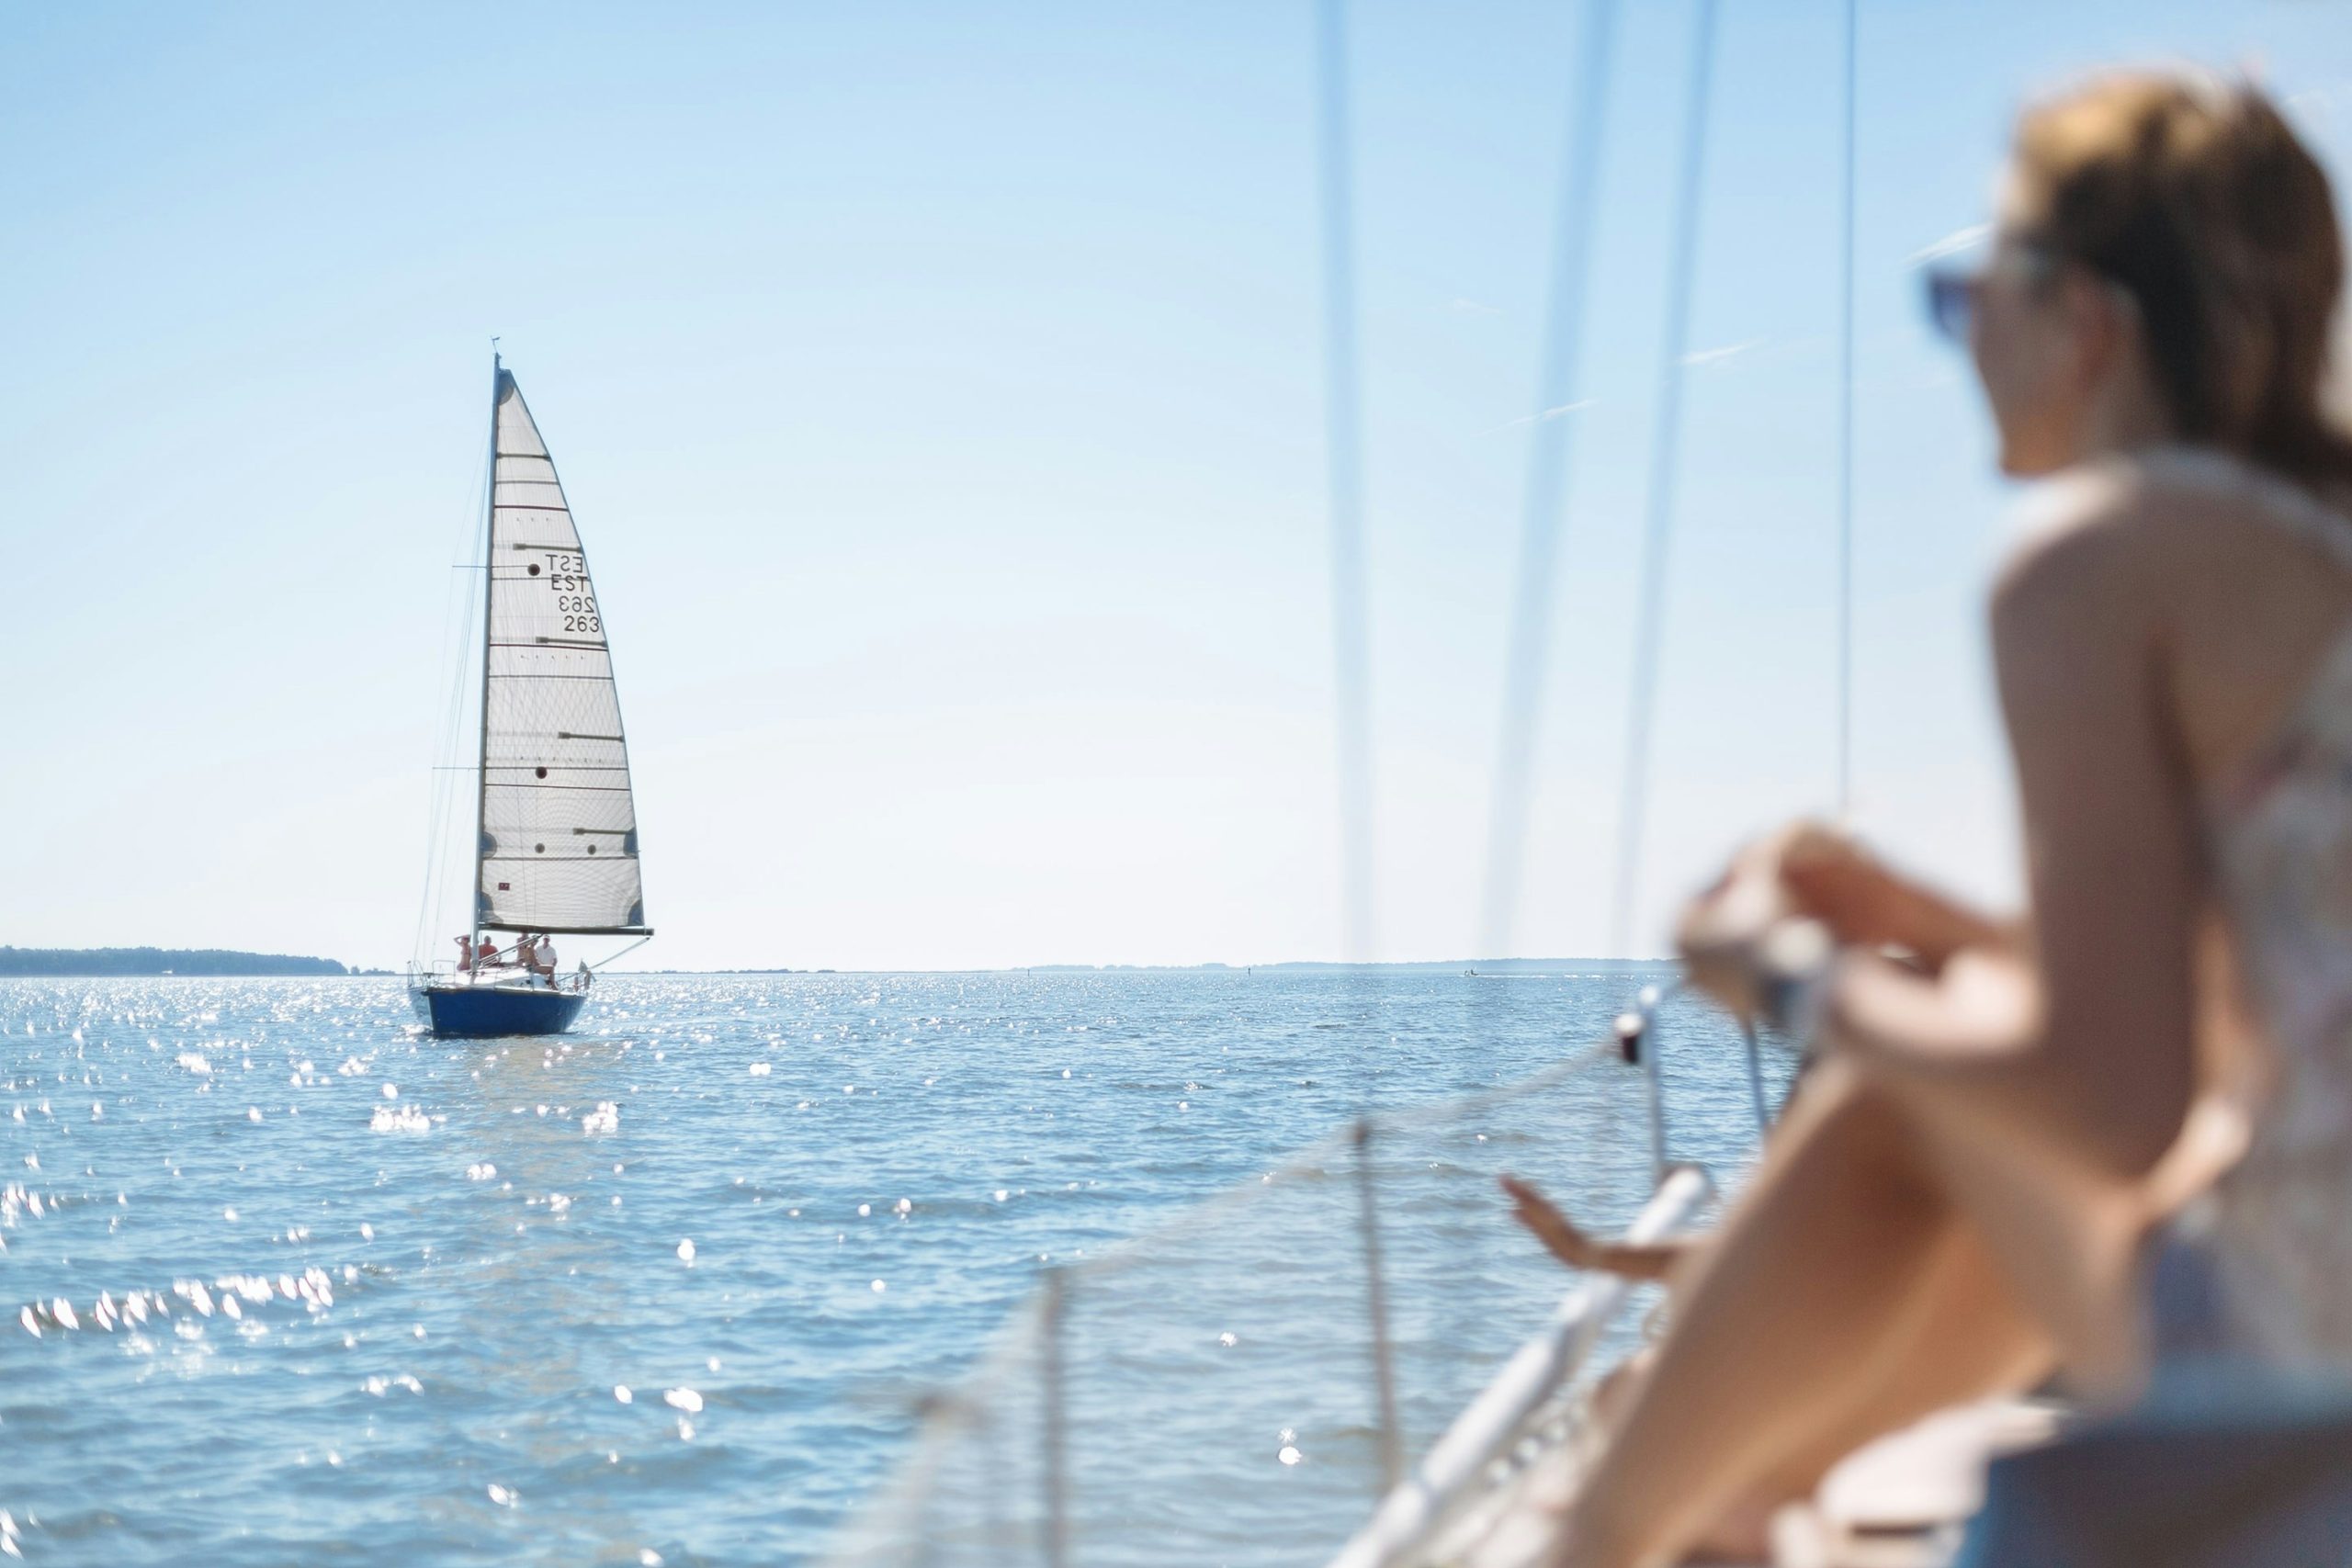 explore the art of sailing with our expert guides and experience the thrill of the open seas with our sailing adventures. book now for an unforgettable nautical experience.